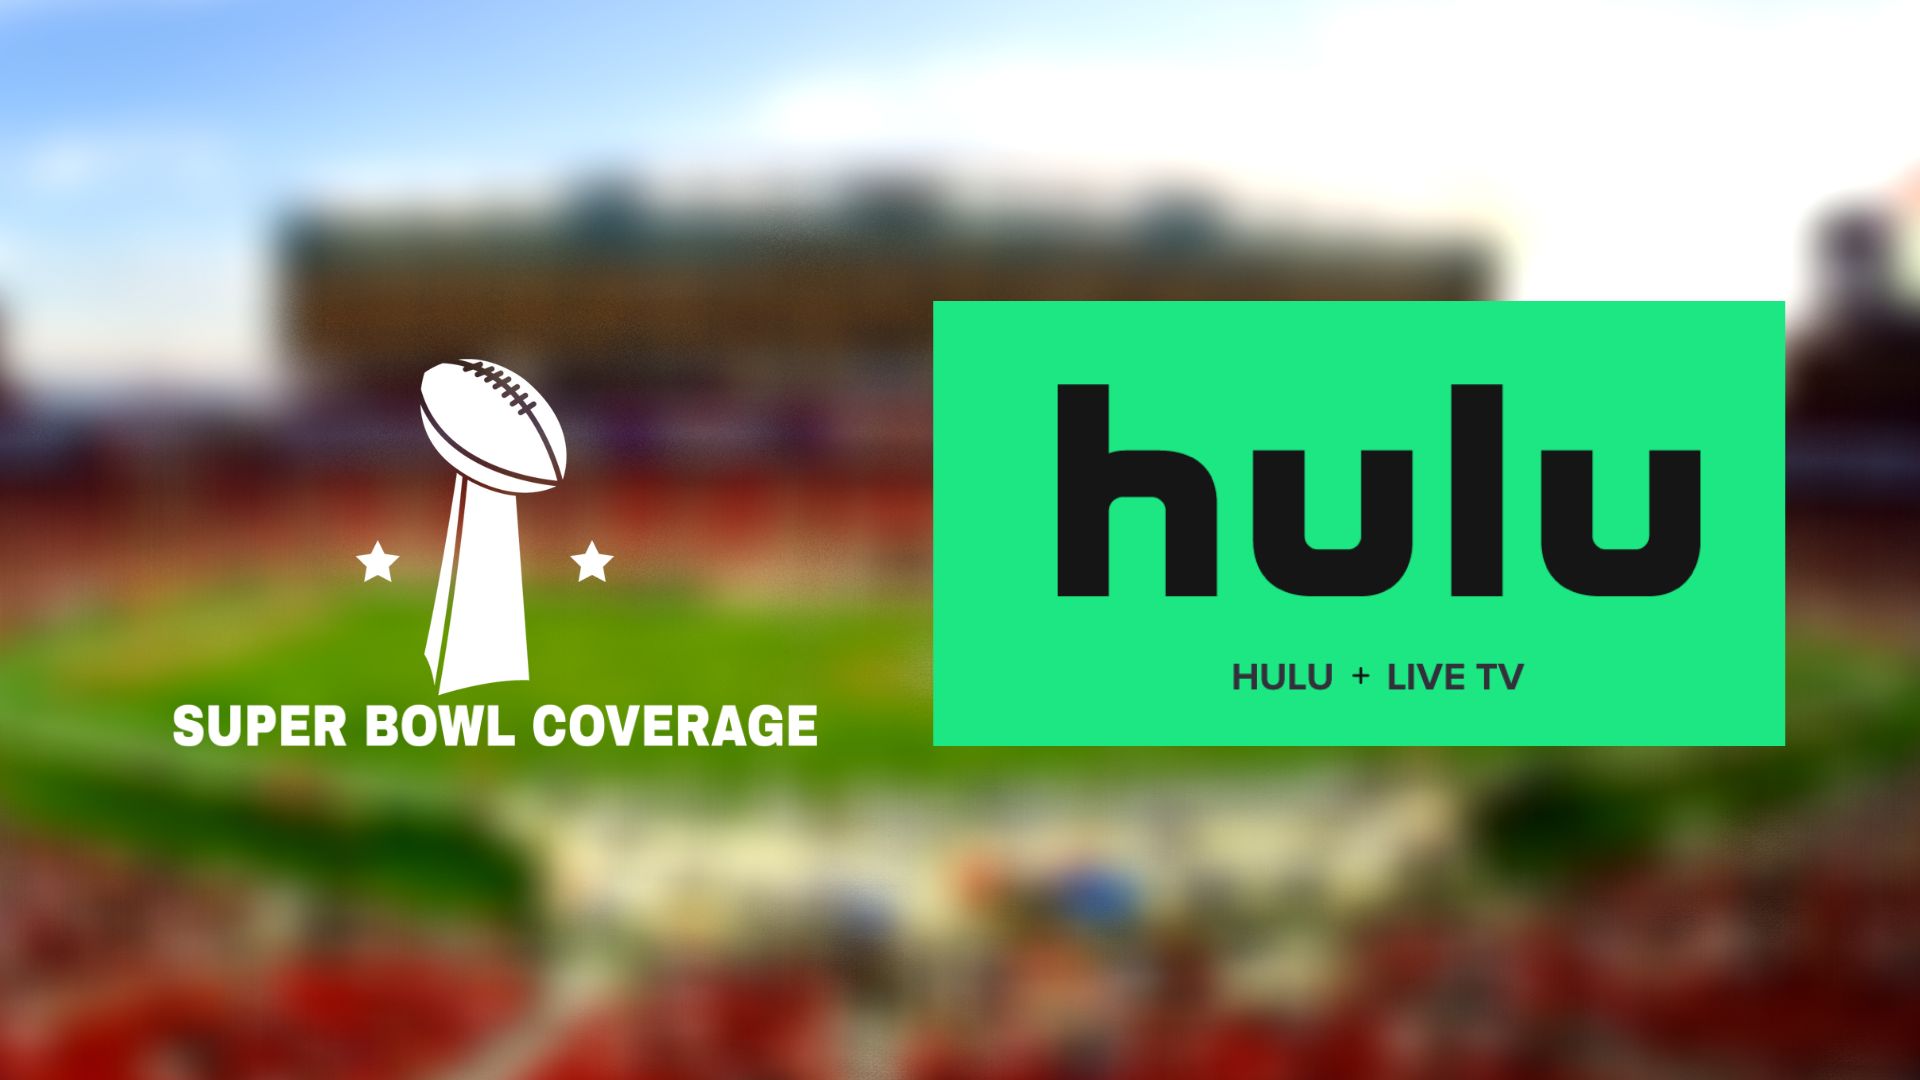 How to Watch Super Bowl on Hulu